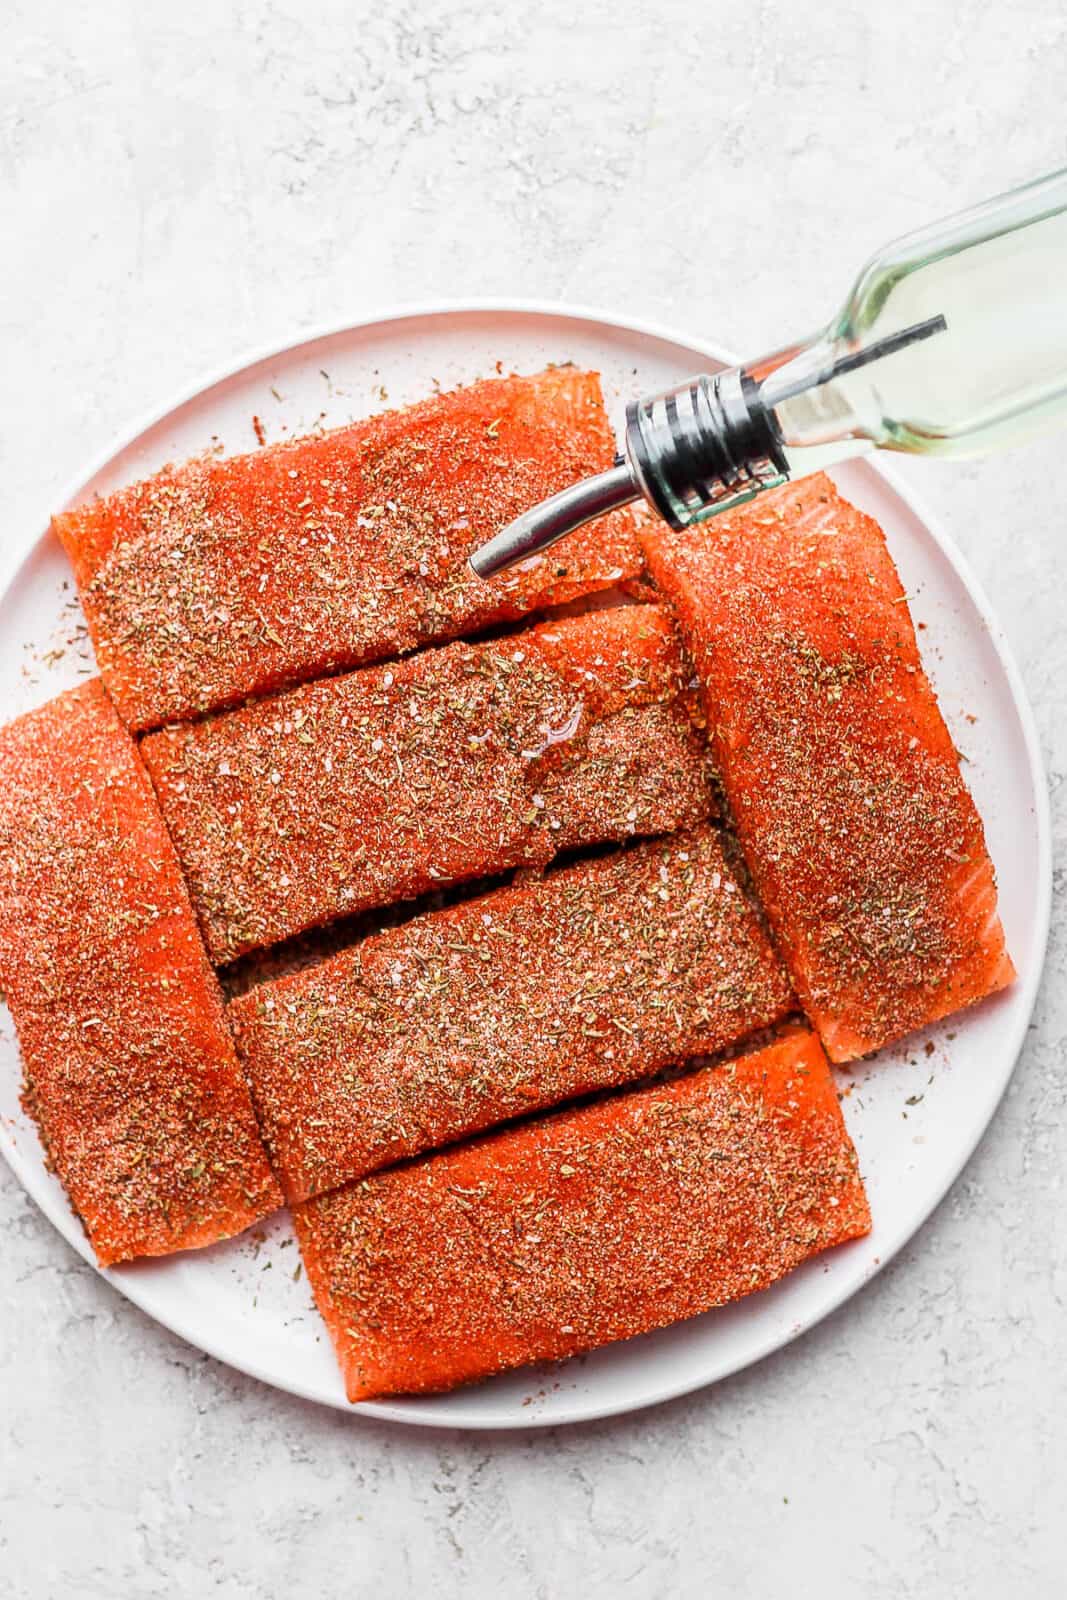 Olive oil being drizzled on seasoned salmon fillets on a plate.